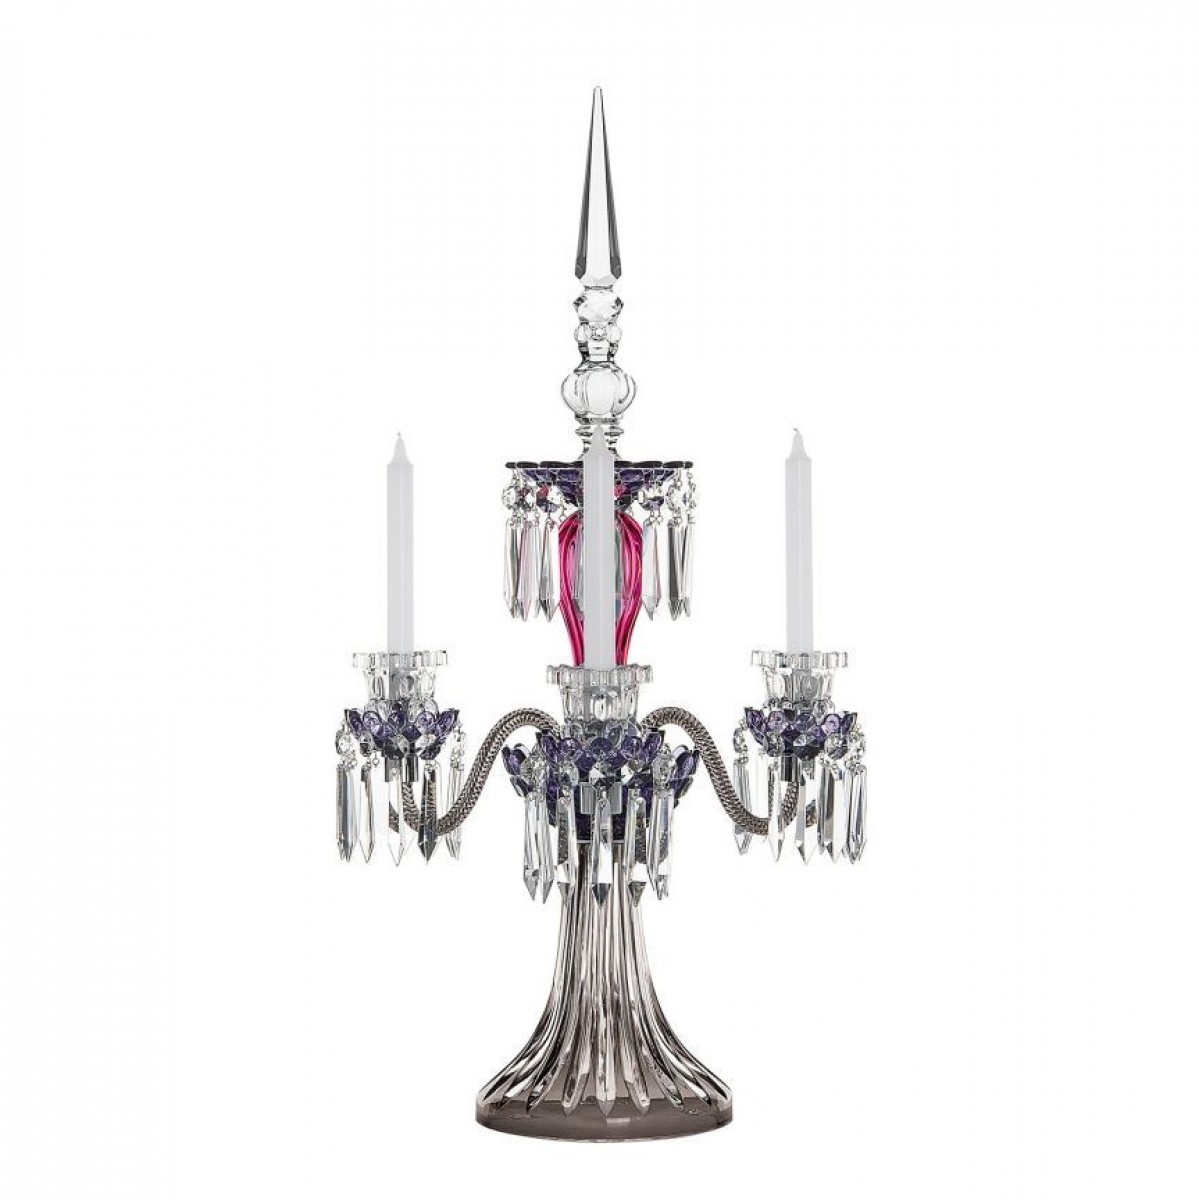 Arlequin 3-Candle Candelabra - Amethyst, Purple and Flannel-grey